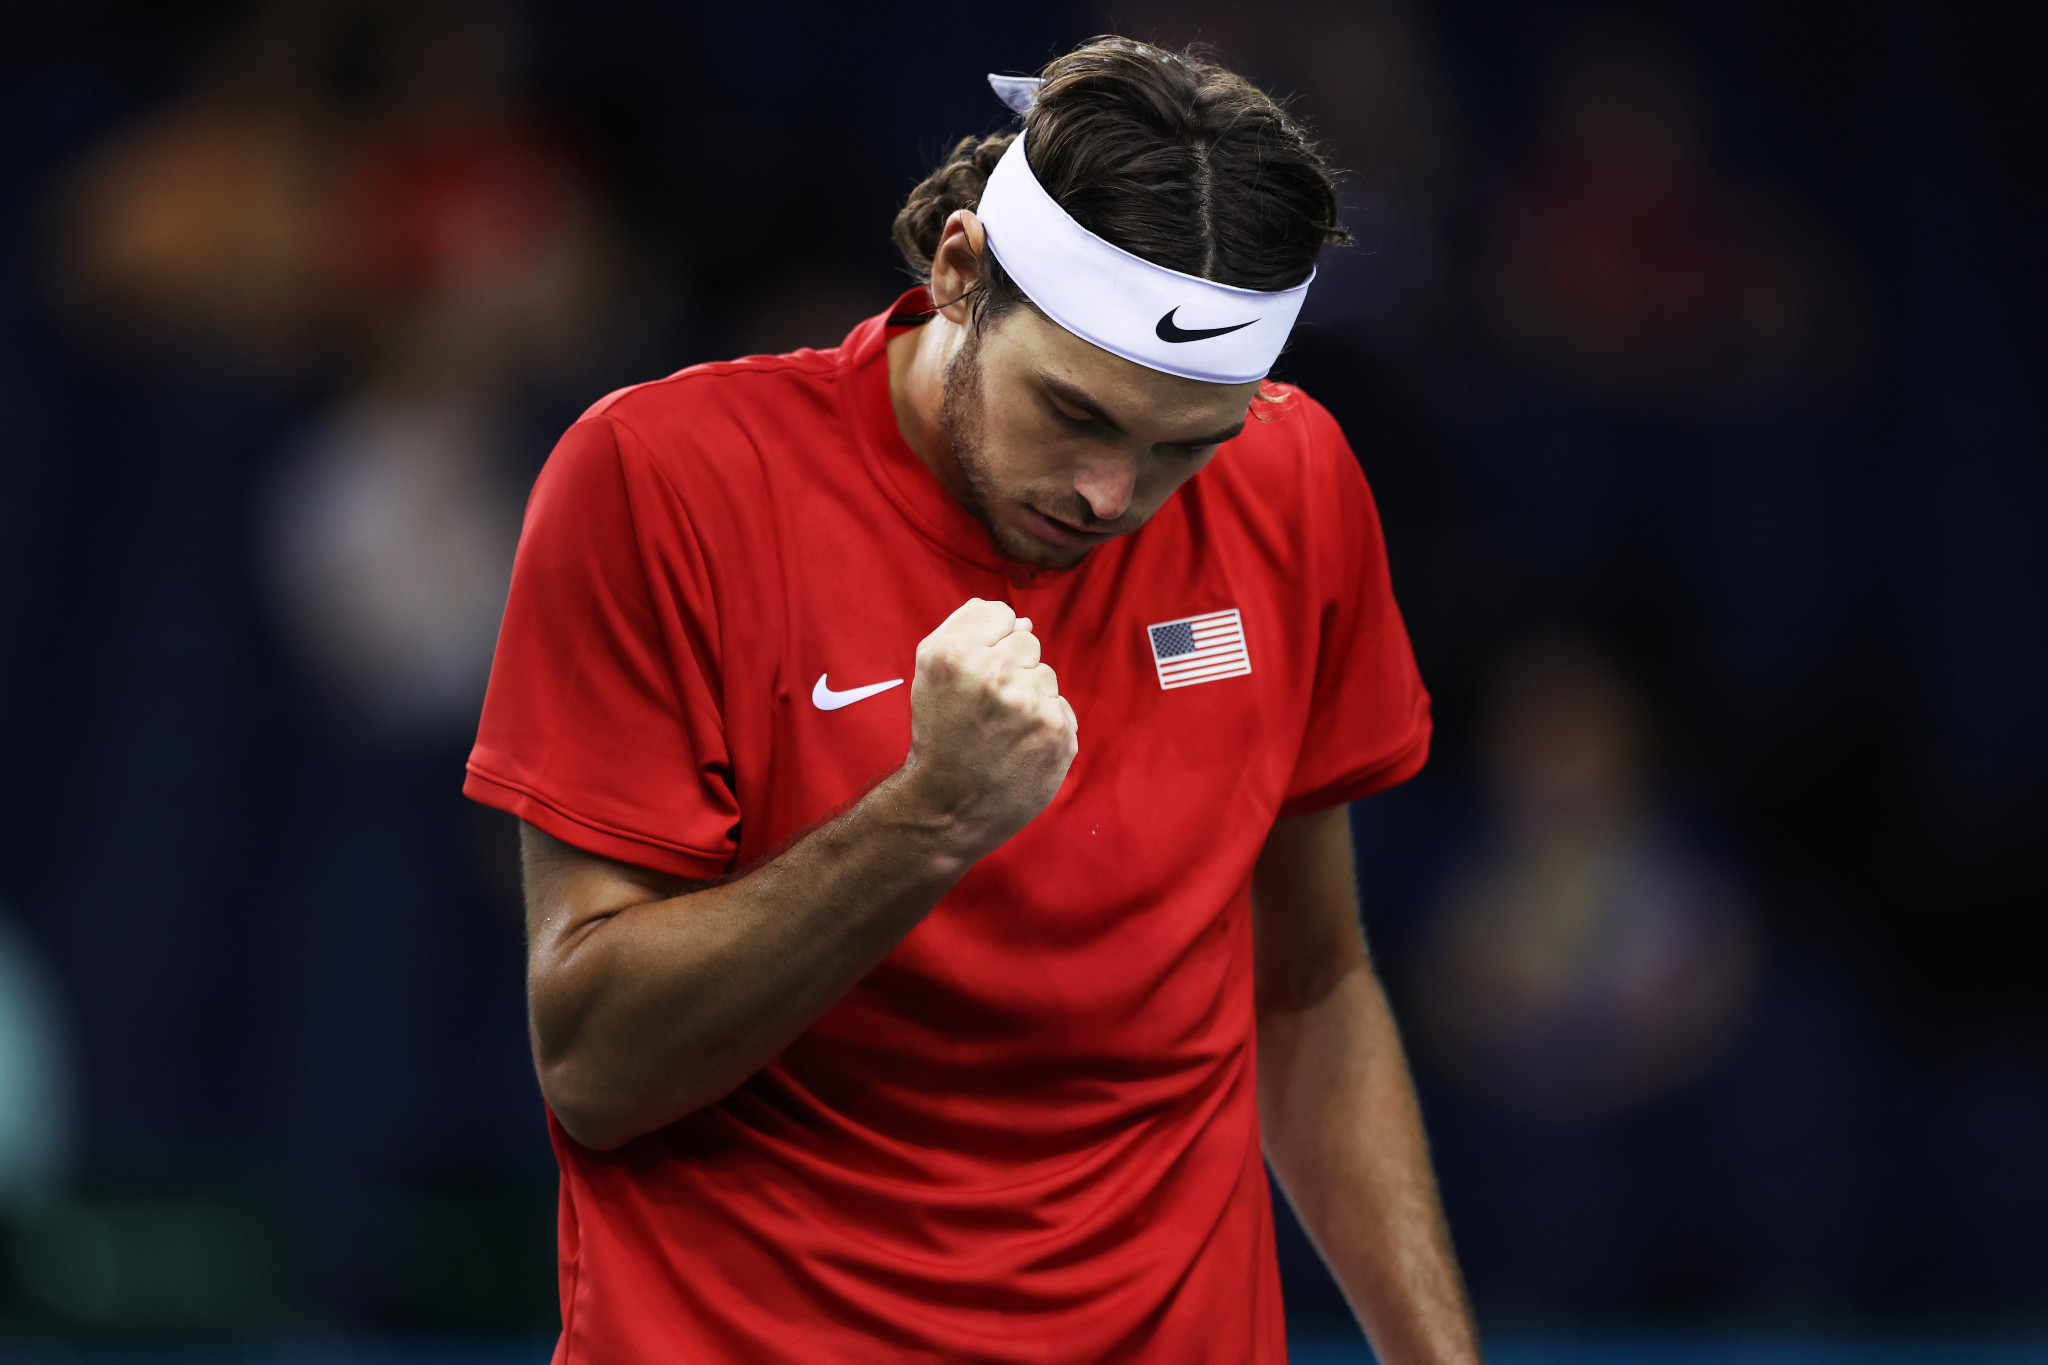 US and Australia earn back-to-back wins at Davis Cup Finals